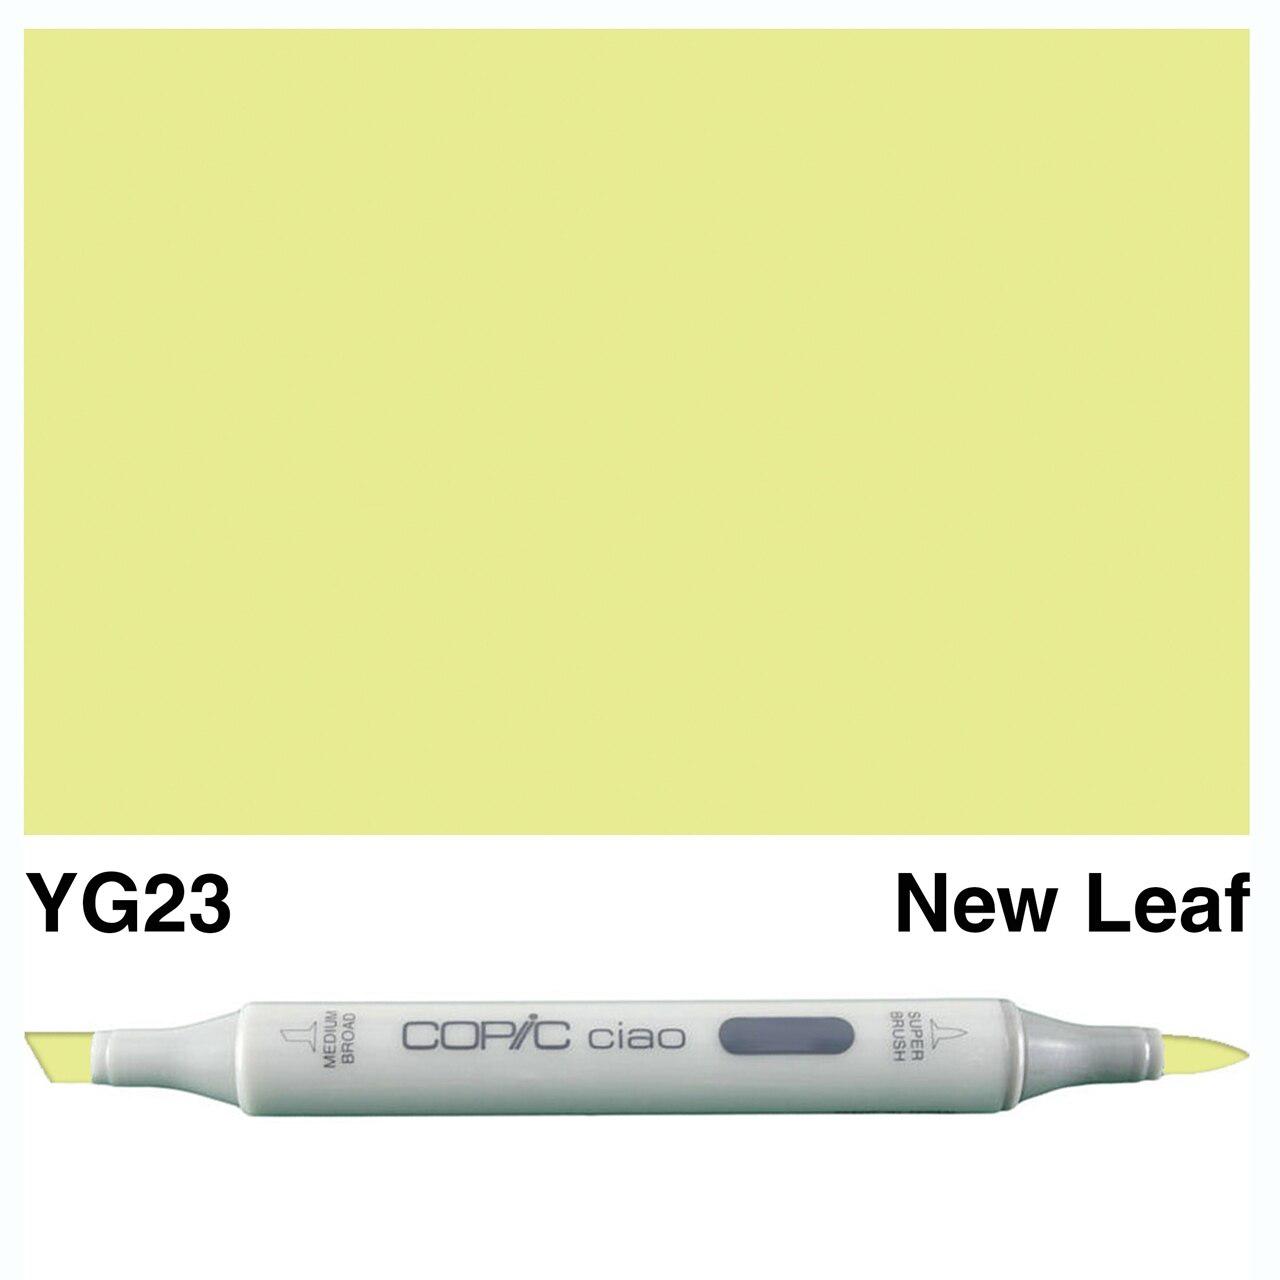 Copic - Ciao Marker - New Leaf - YG23-ScrapbookPal